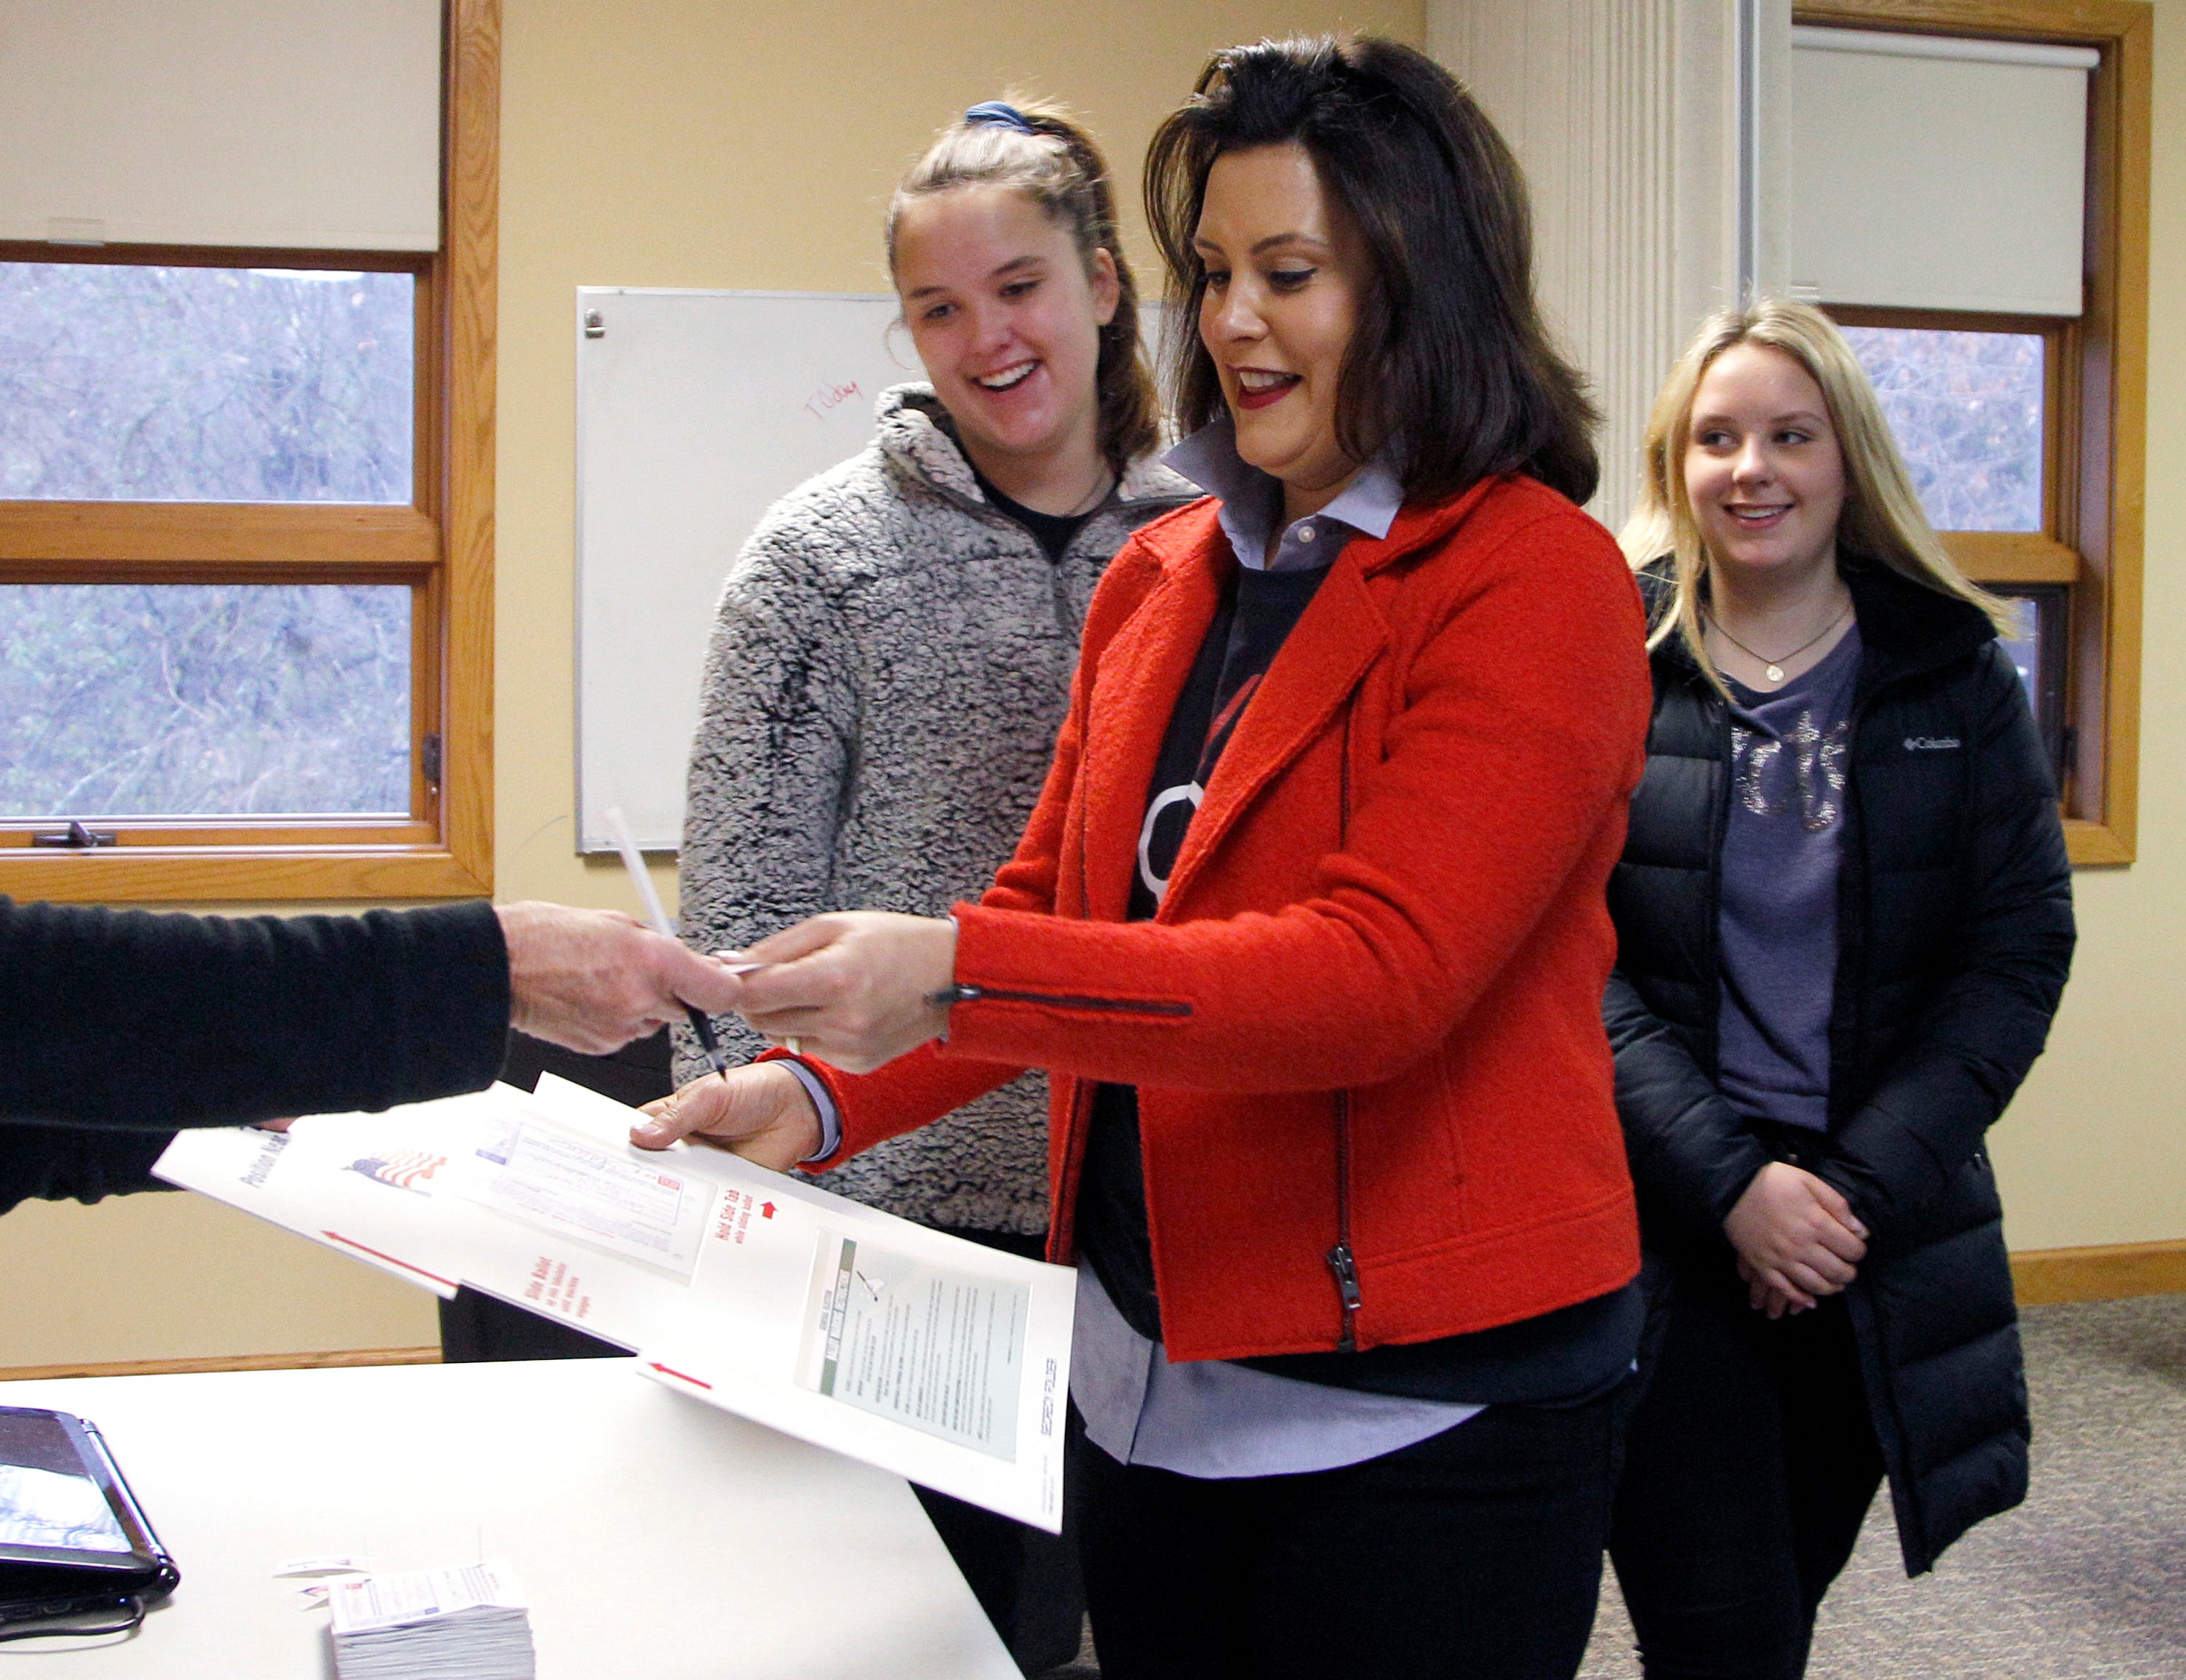 Michigan Democratic gubernatorial candidate Gretchen Whitmer, with daughters Sherry, left, and Sydney, right, turns in her privacy folder and receives a sticker after casting her ballot, Tuesday, Nov. 6, 2018, at St. Paul Lutheran Church in East Lansing.